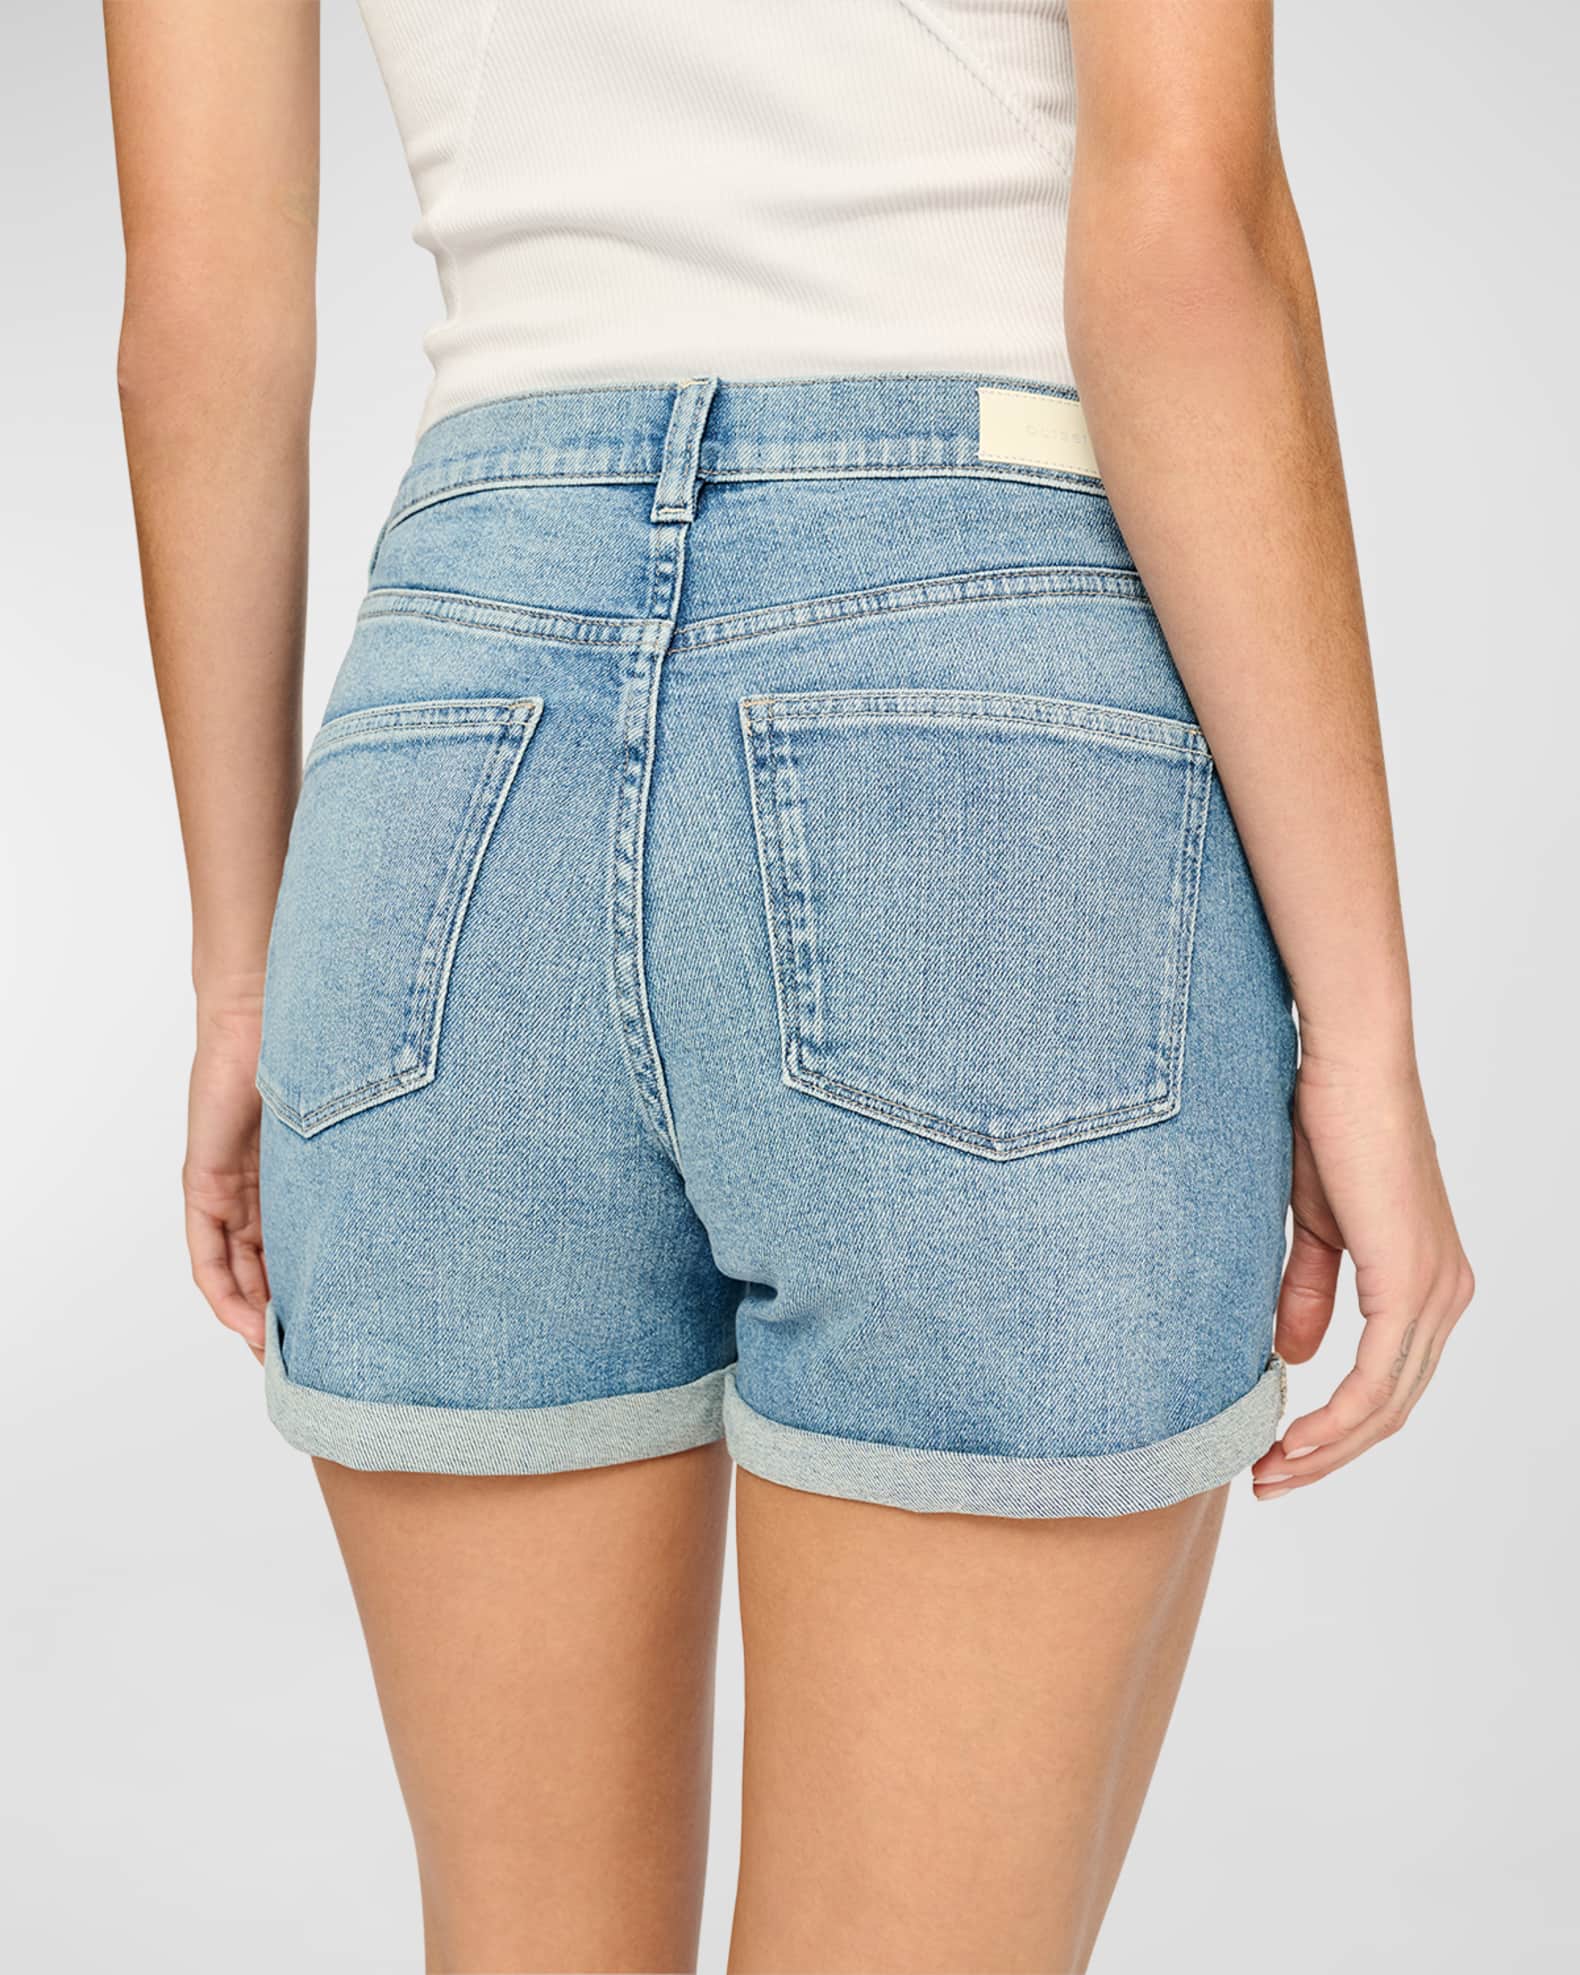 DL1961 Ross Distressed Lucy High Rise Shorts – a Spirit Animal